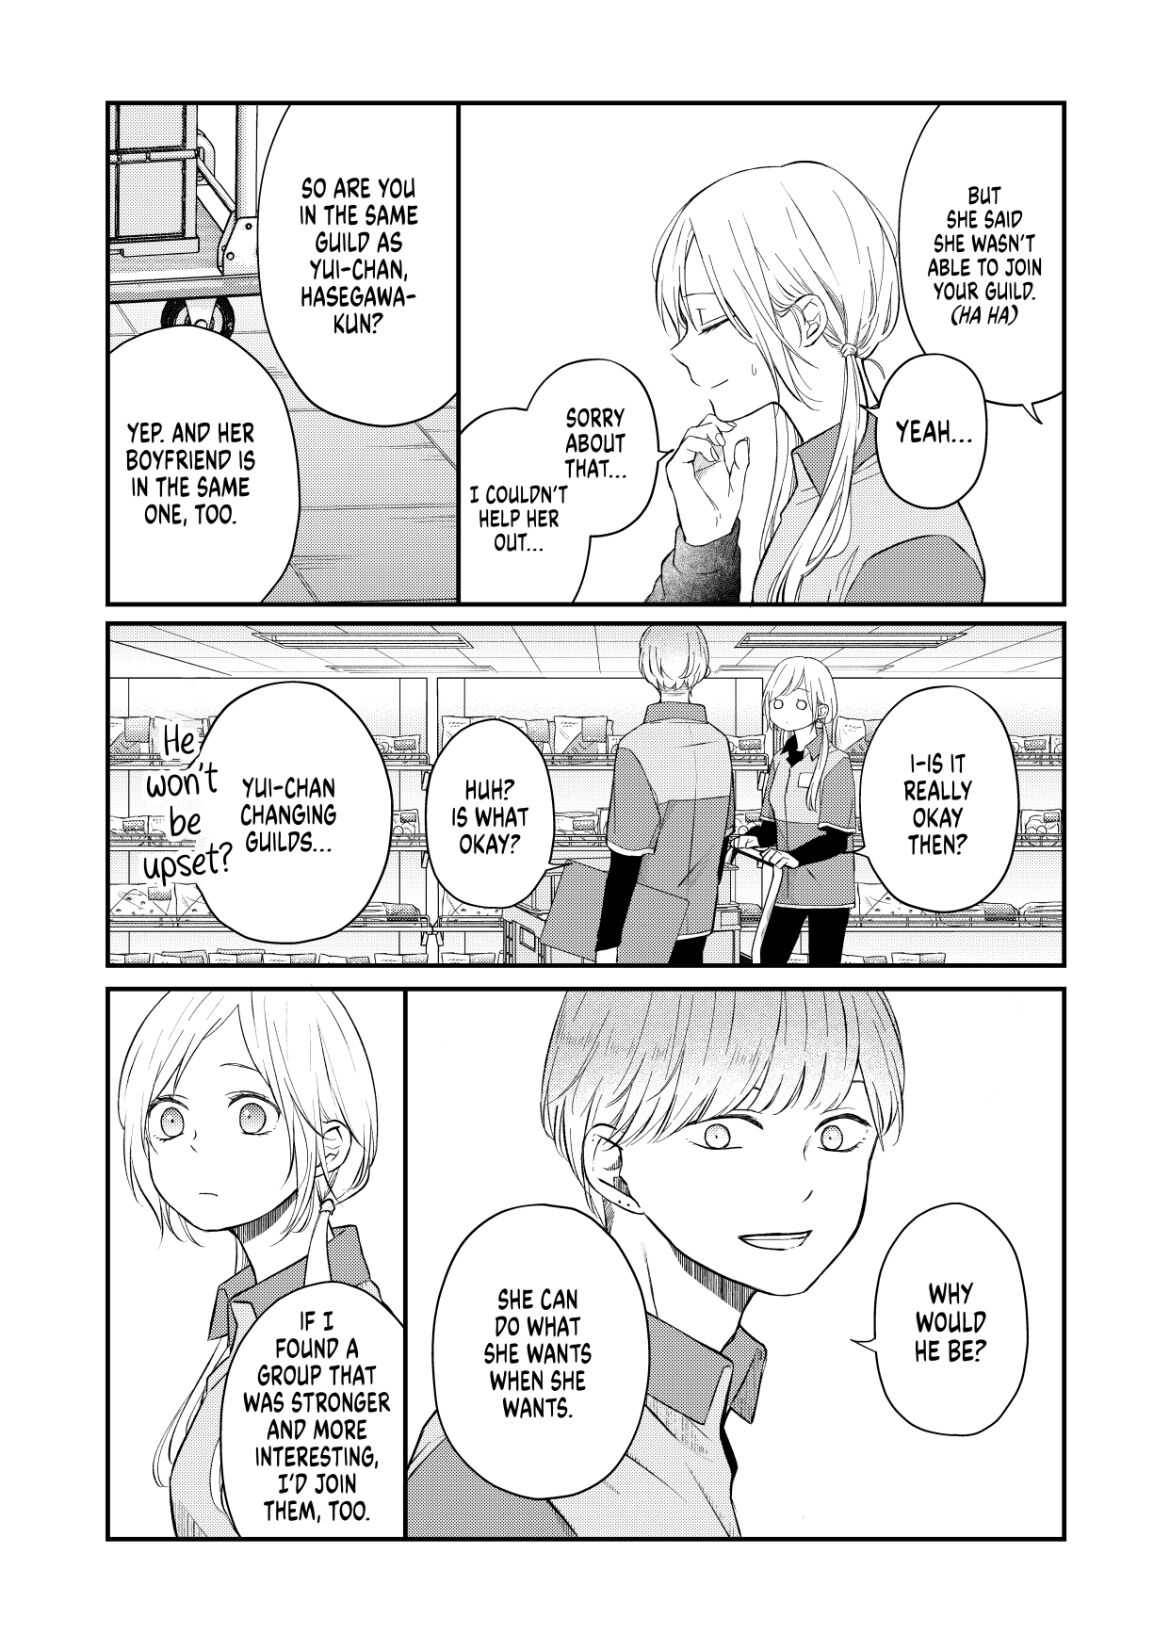 My Love Story with Yamada-Kun at Lv999 Chapter 100: Do we finally